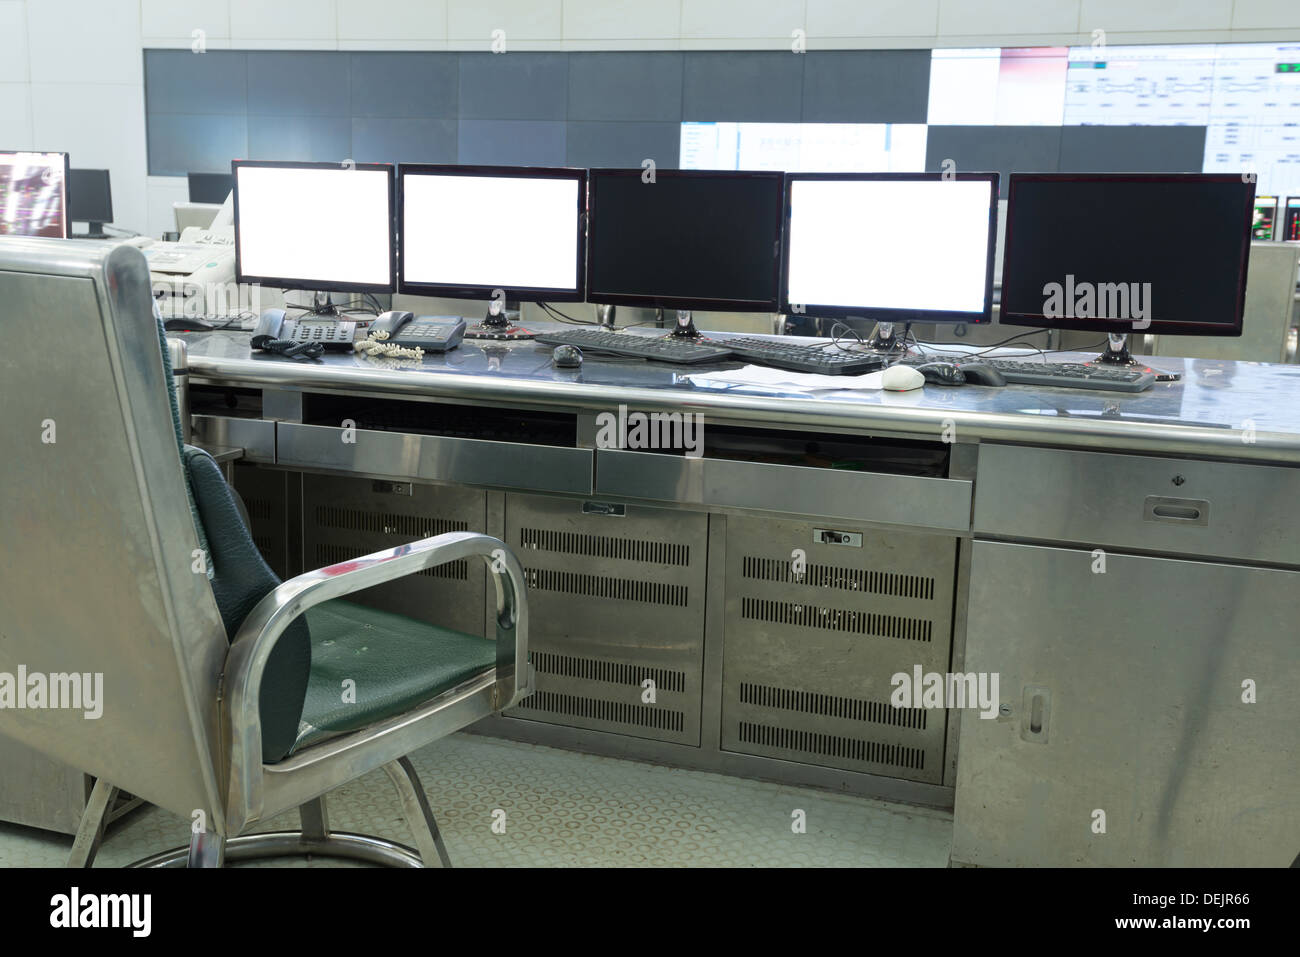 developed technology inside the railway control room Stock Photo